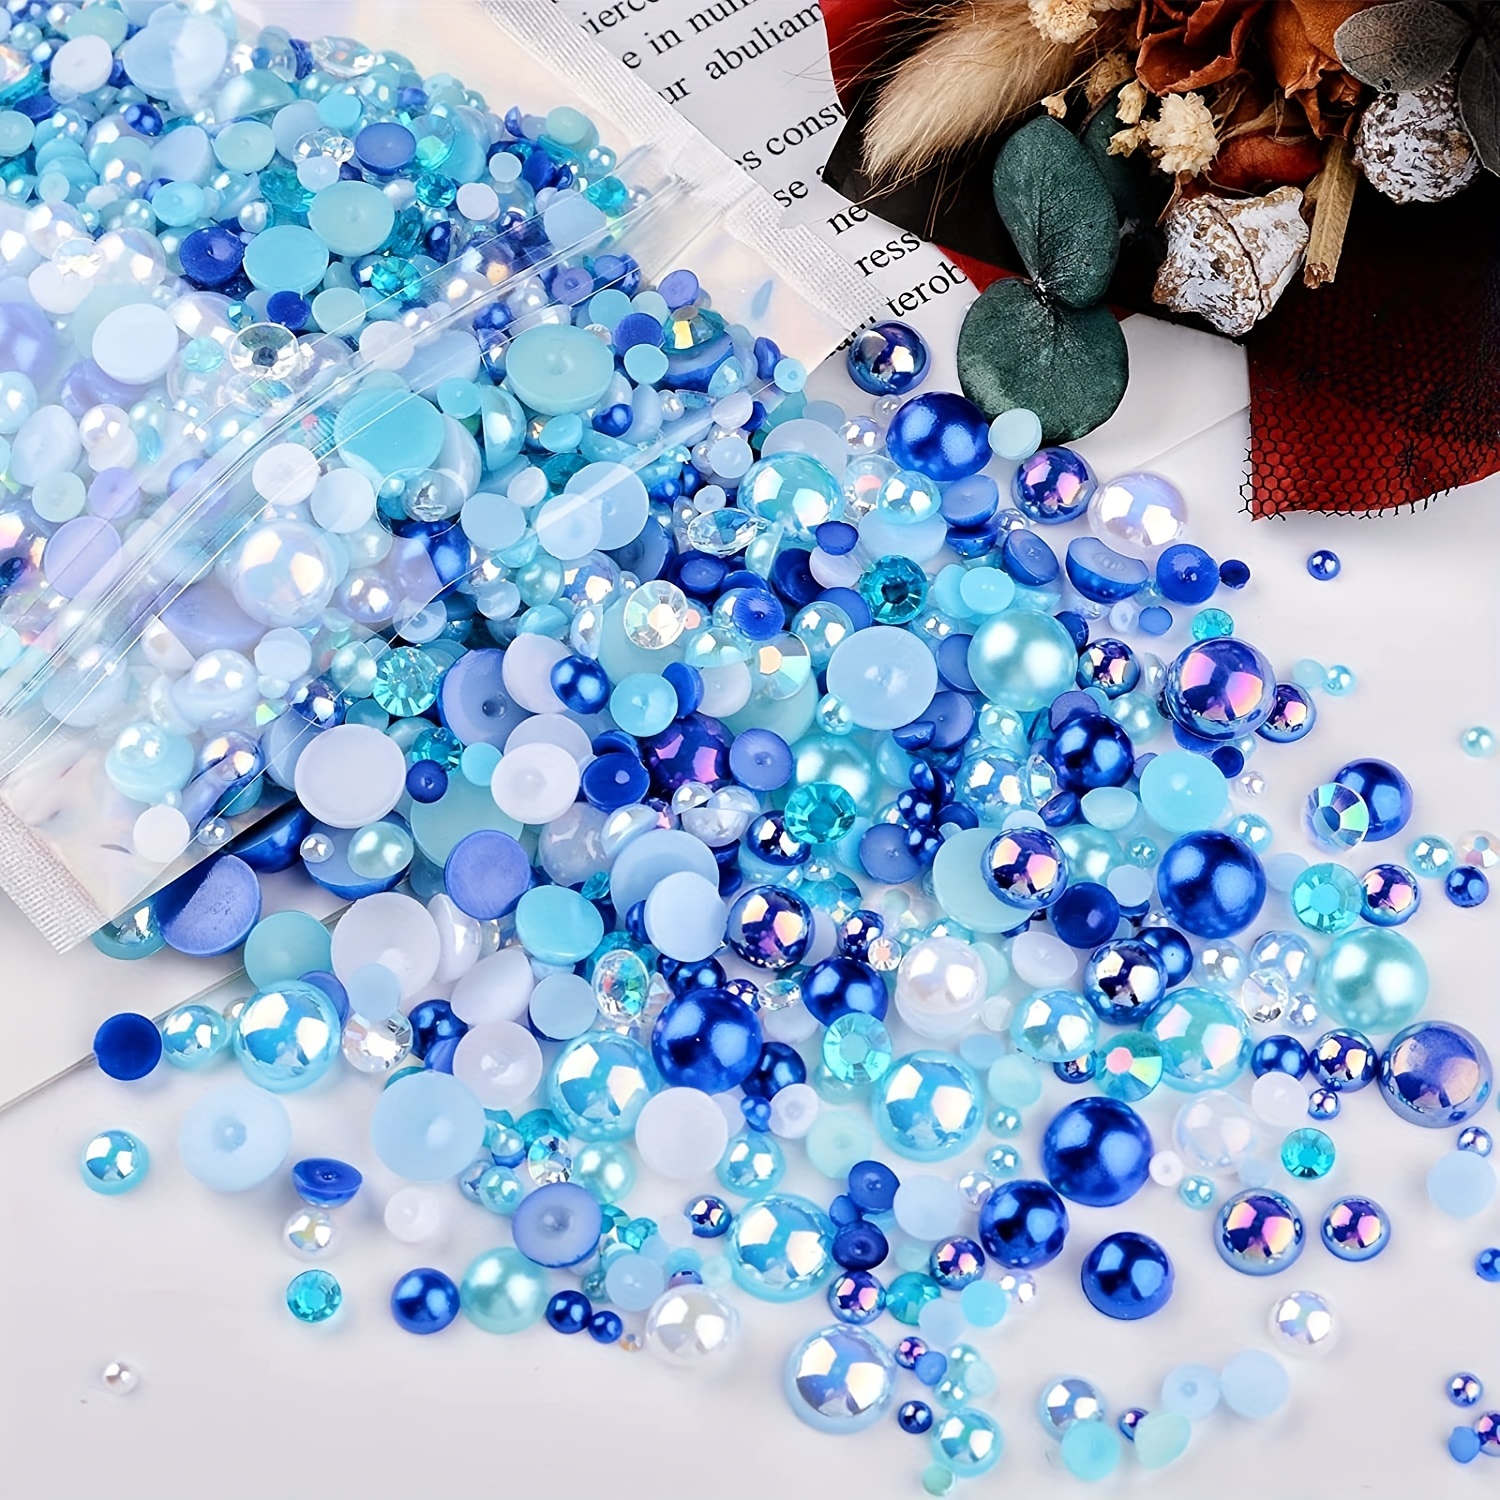 

3800pcs 30g Flat Back Pearls And Rhinestones For Crafts, 3mm-10mm Mixed Pearl Rhinestones For Nail Art Eye Makeup, Flat Back Rhinestones And Half Pearls Cabochons Blue Pink White